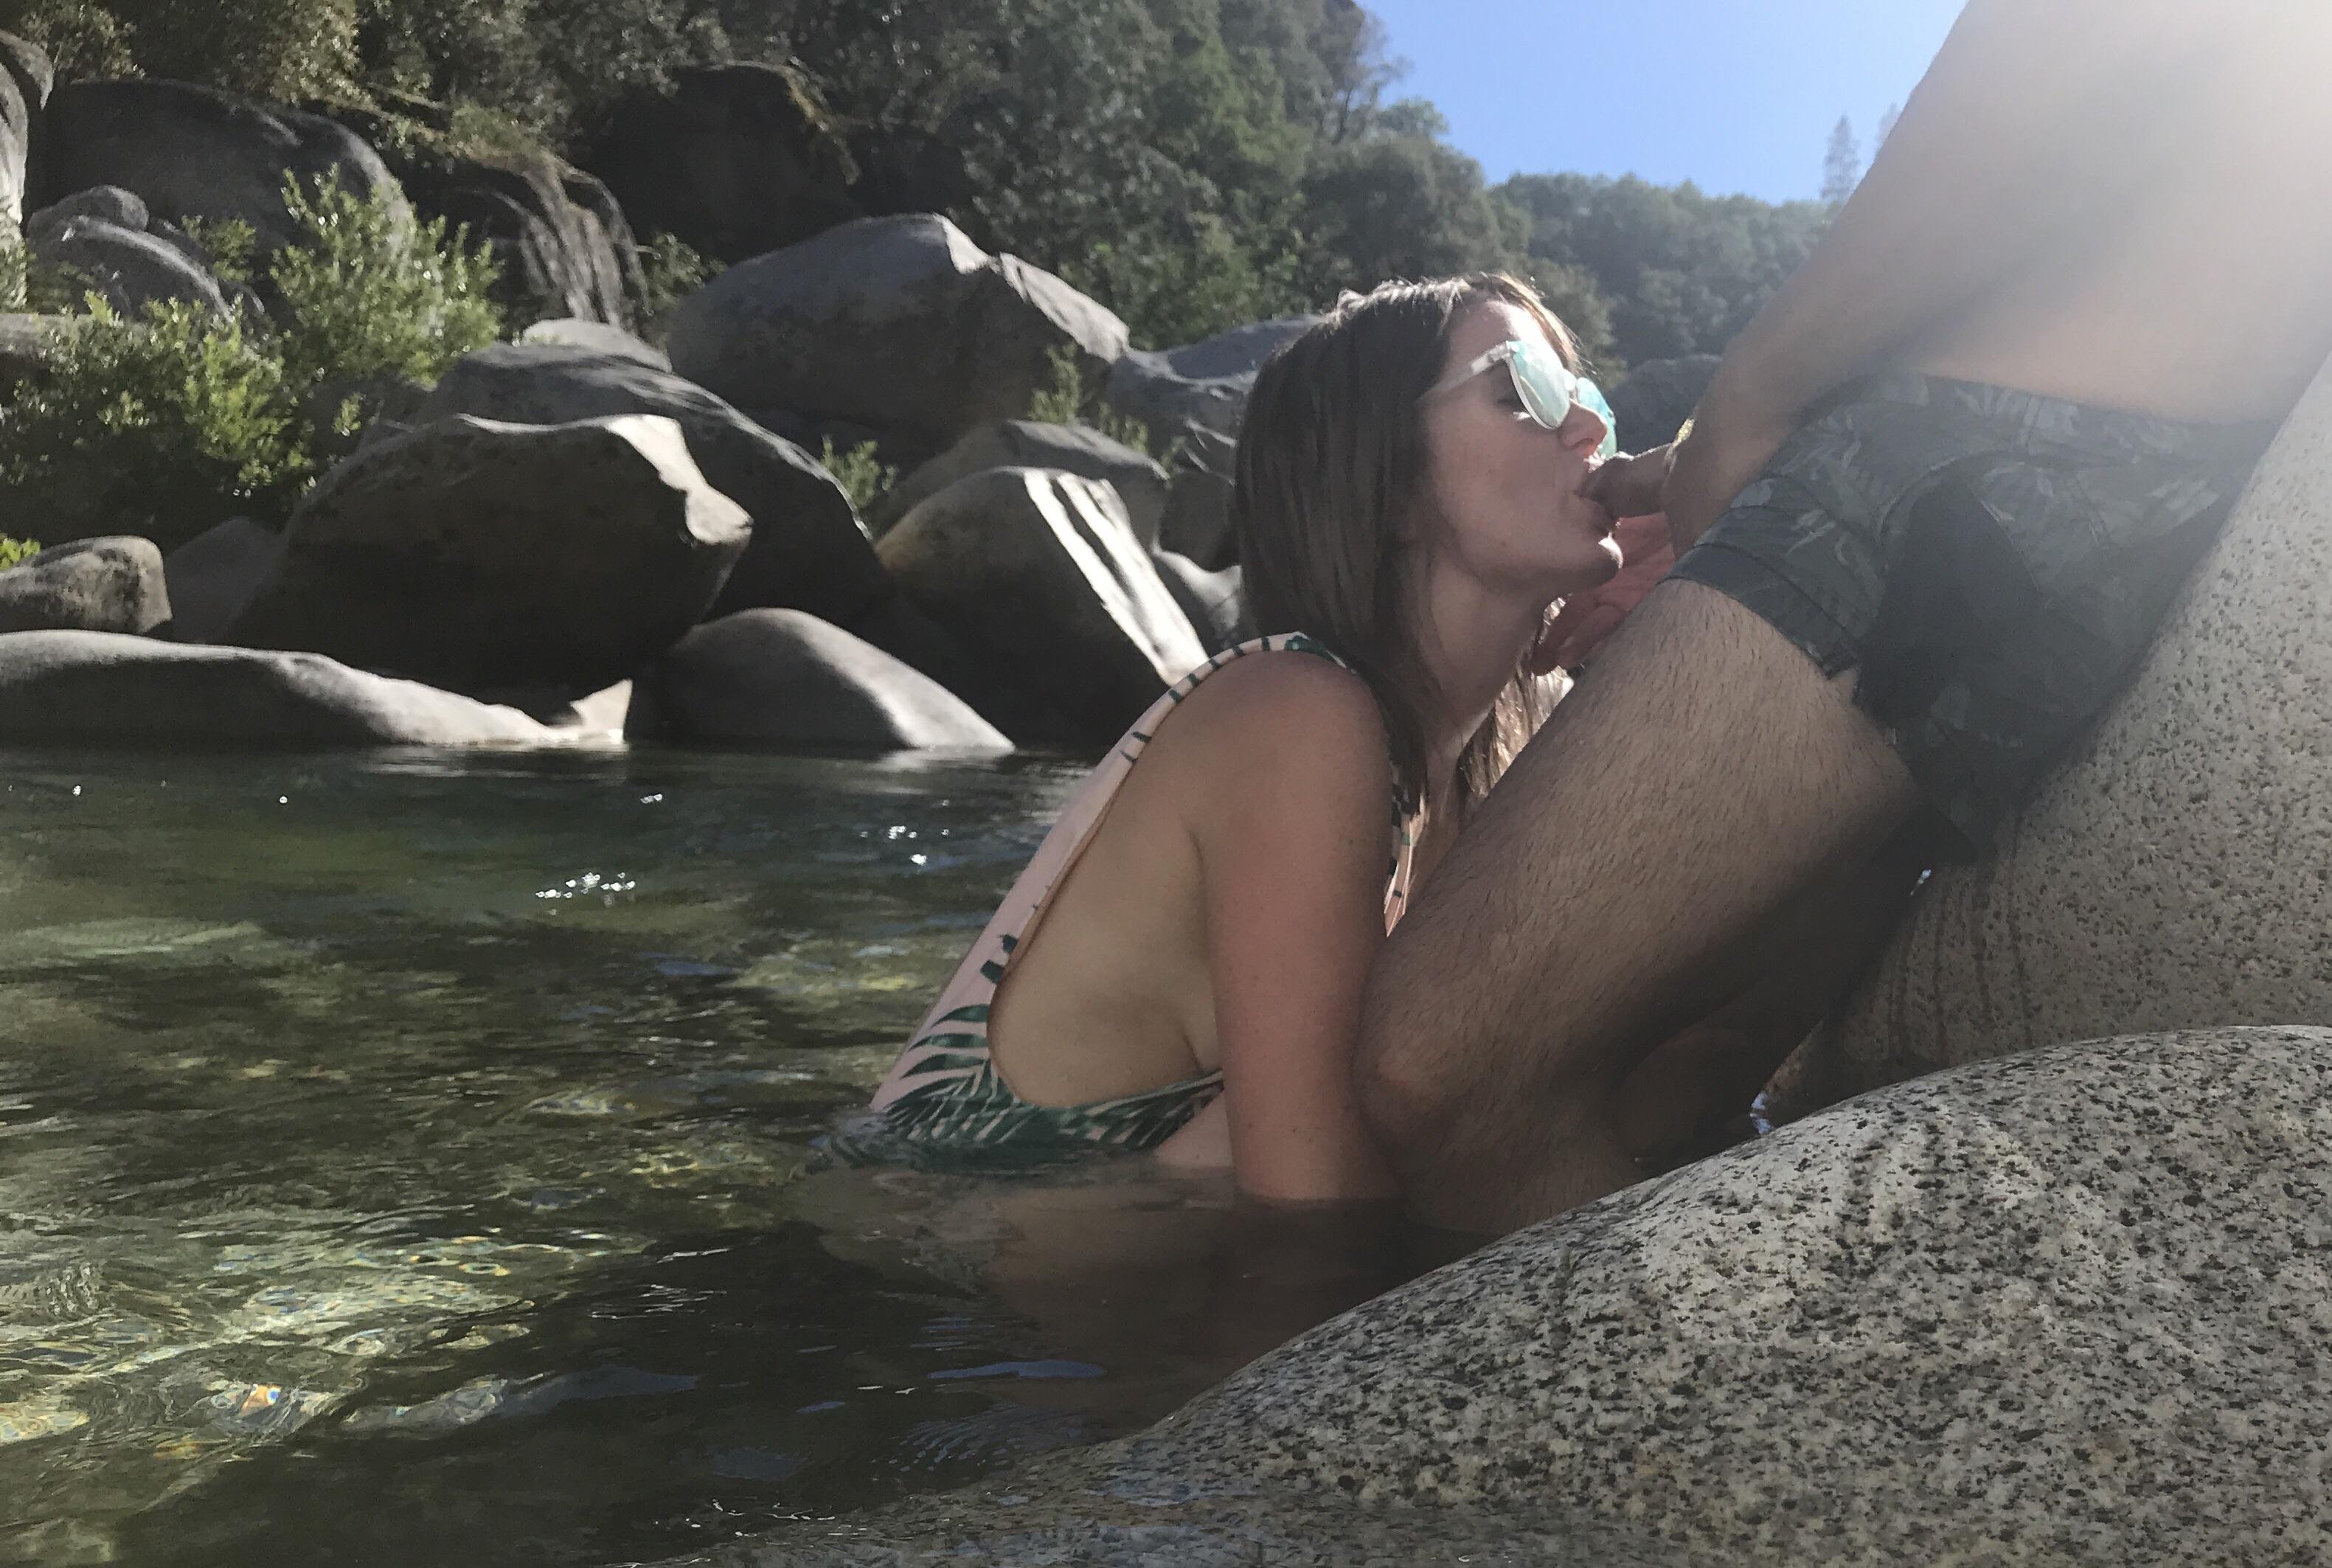 Who wants to see a video from this river sesh? [M29 + F25]